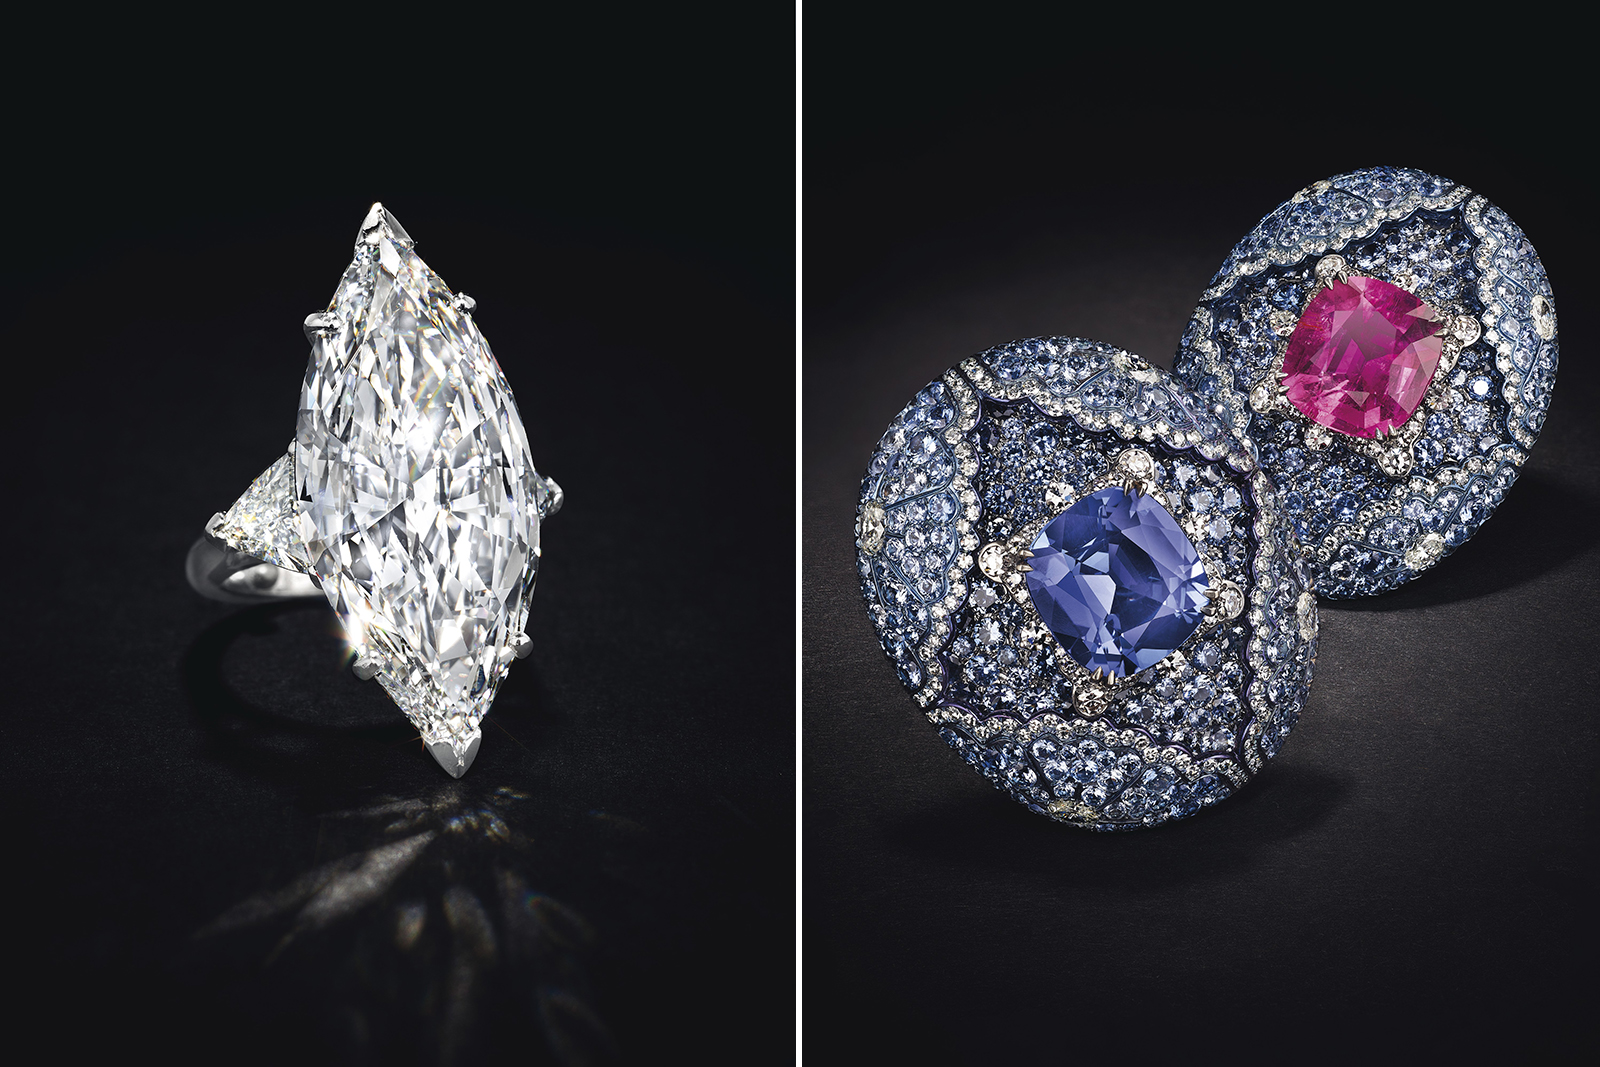 Left: 16.69 cts marquise cut D-colour diamond ring. Right: Carnet earrings with rubellites, tanzanites, sapphires and diamonds